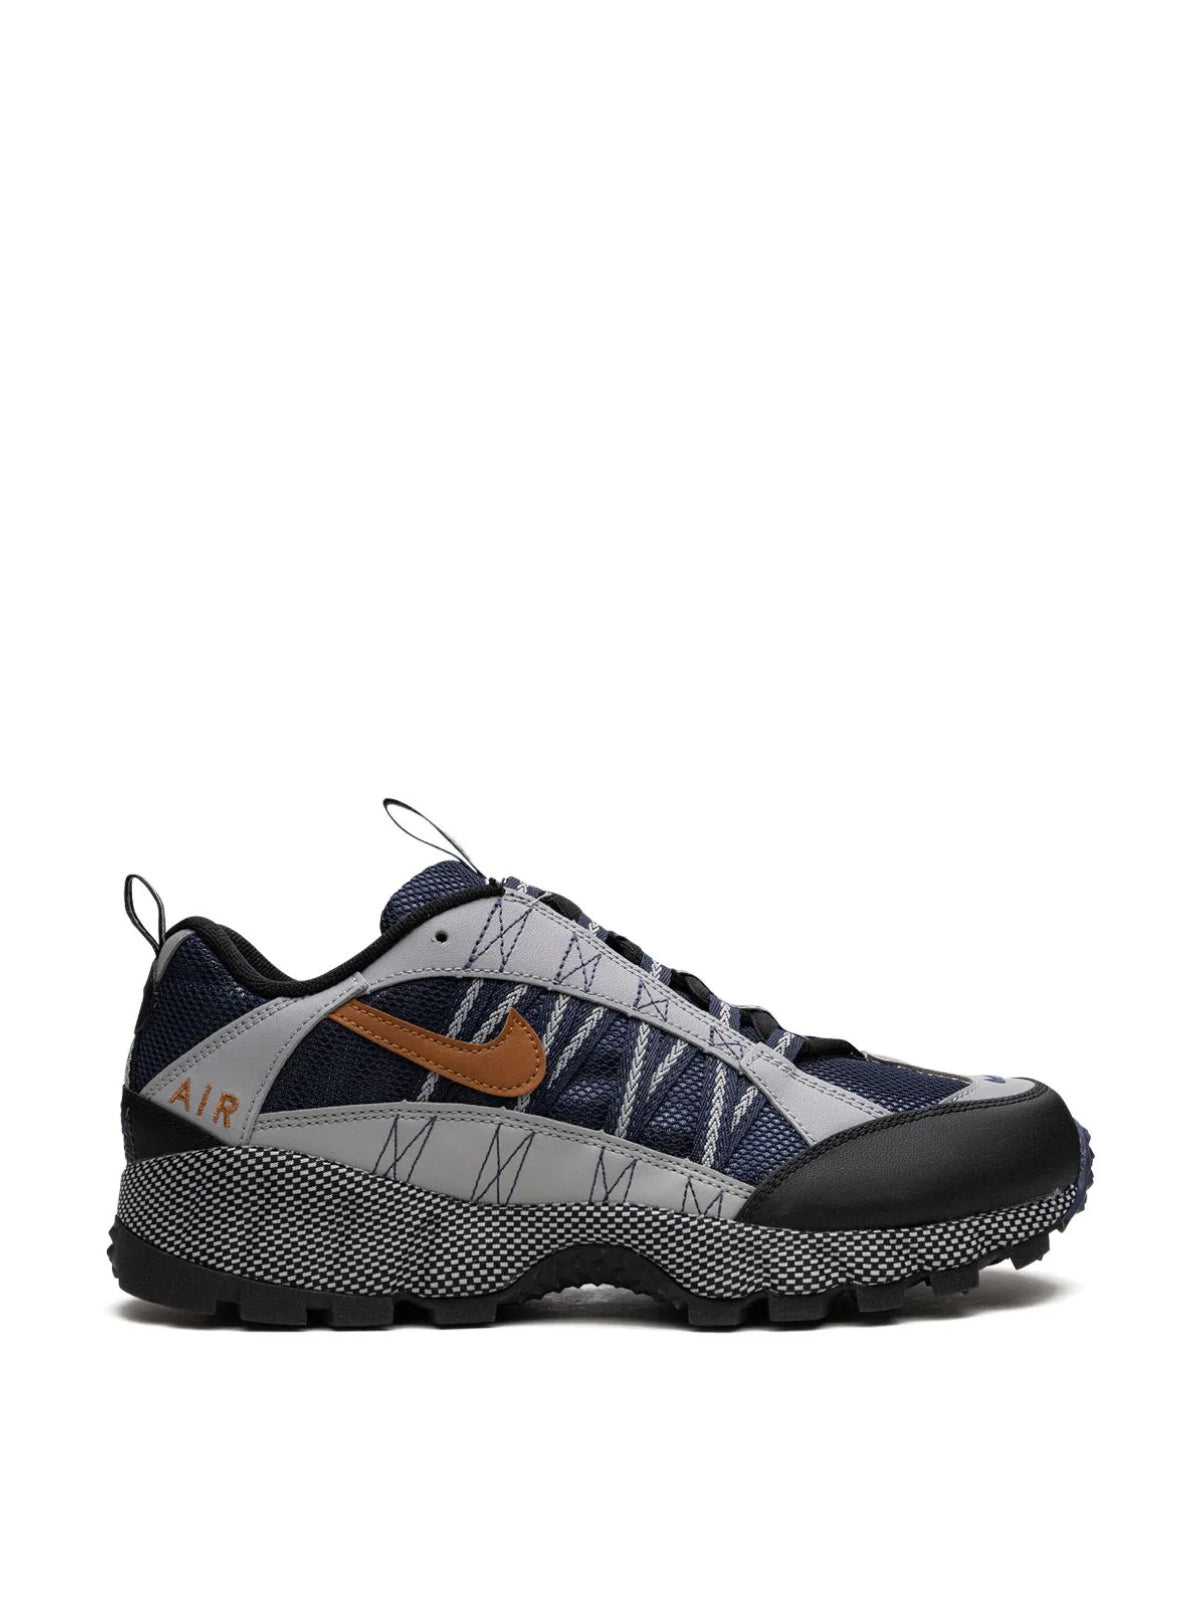 Nike-OUTLET-SALE-Air Humara QS Sneakers-ARCHIVIST